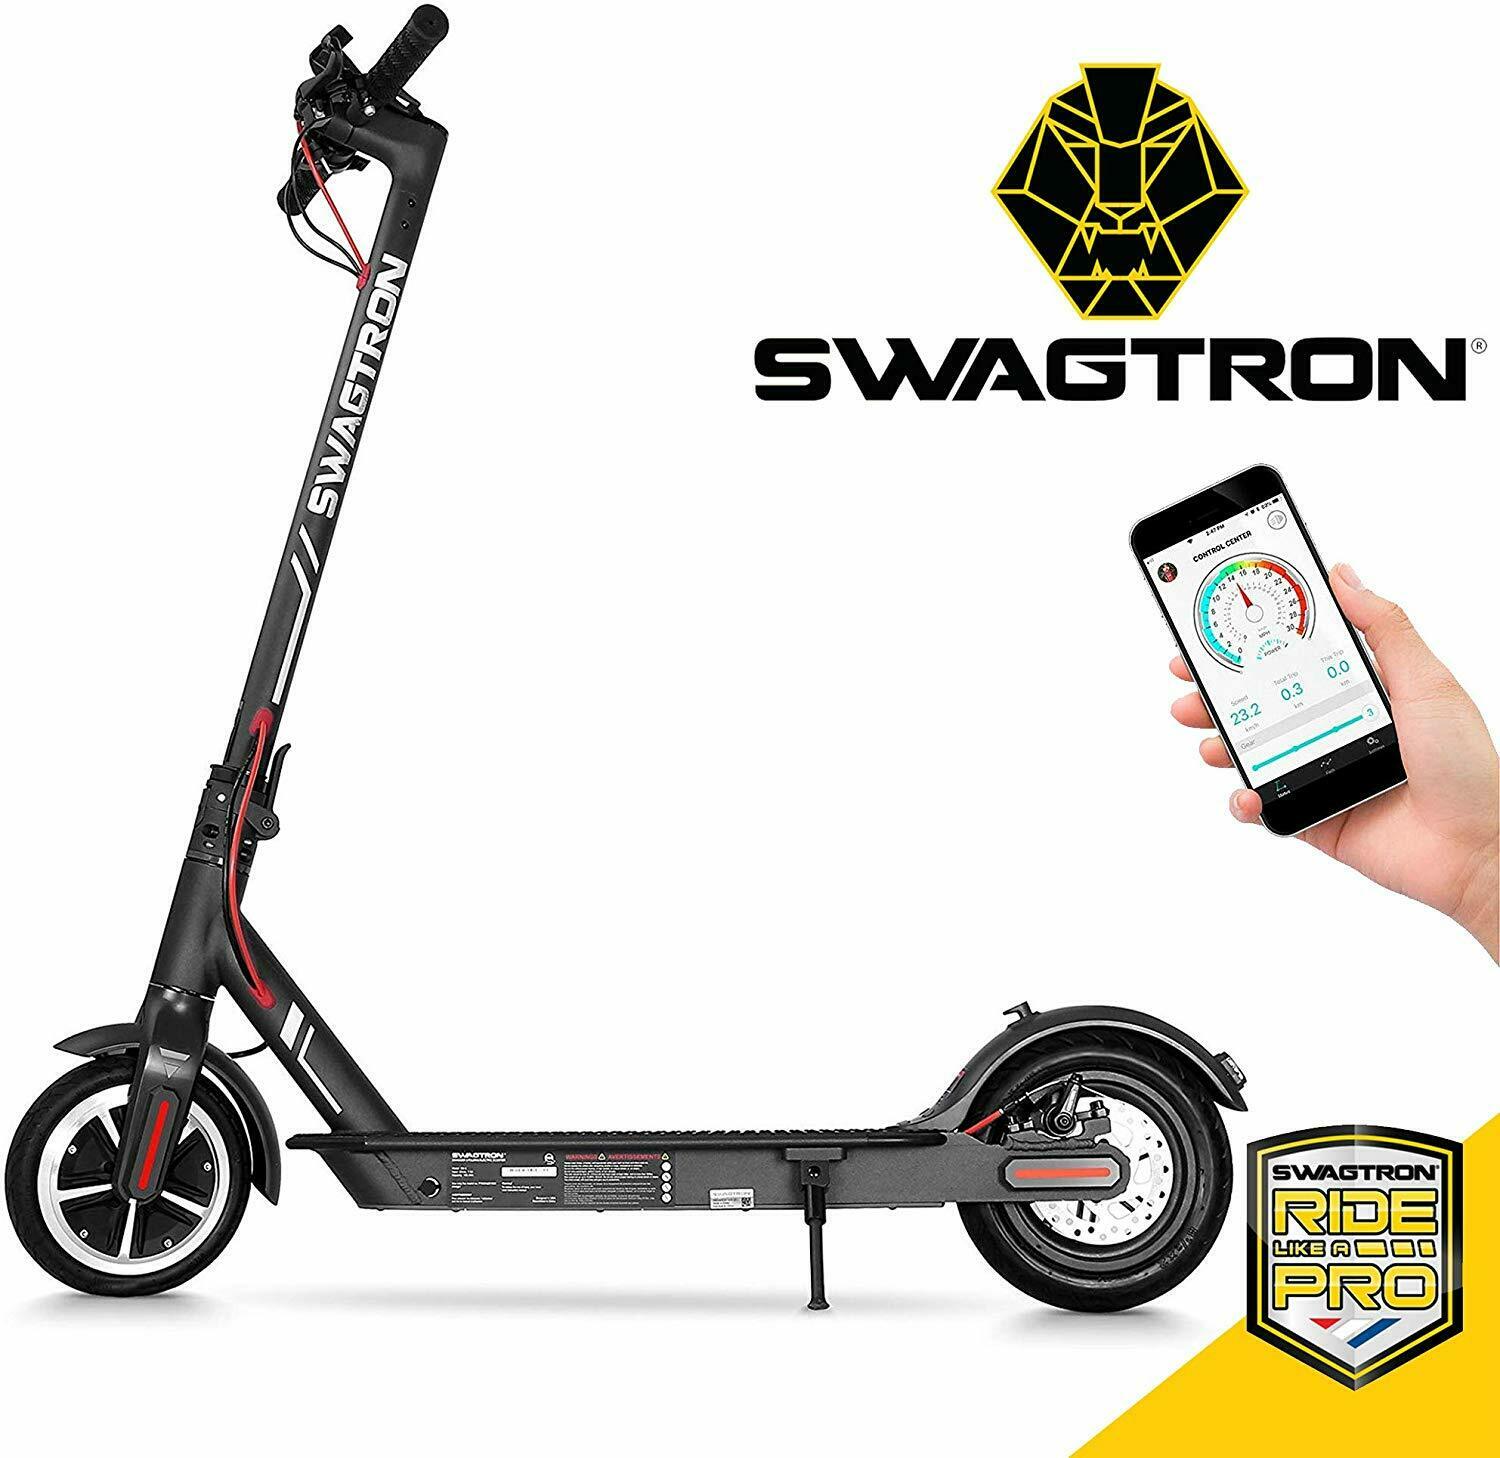 Swagtron Swagger 5 High Speed Electric Scooter Folding & Portable Cruise Control